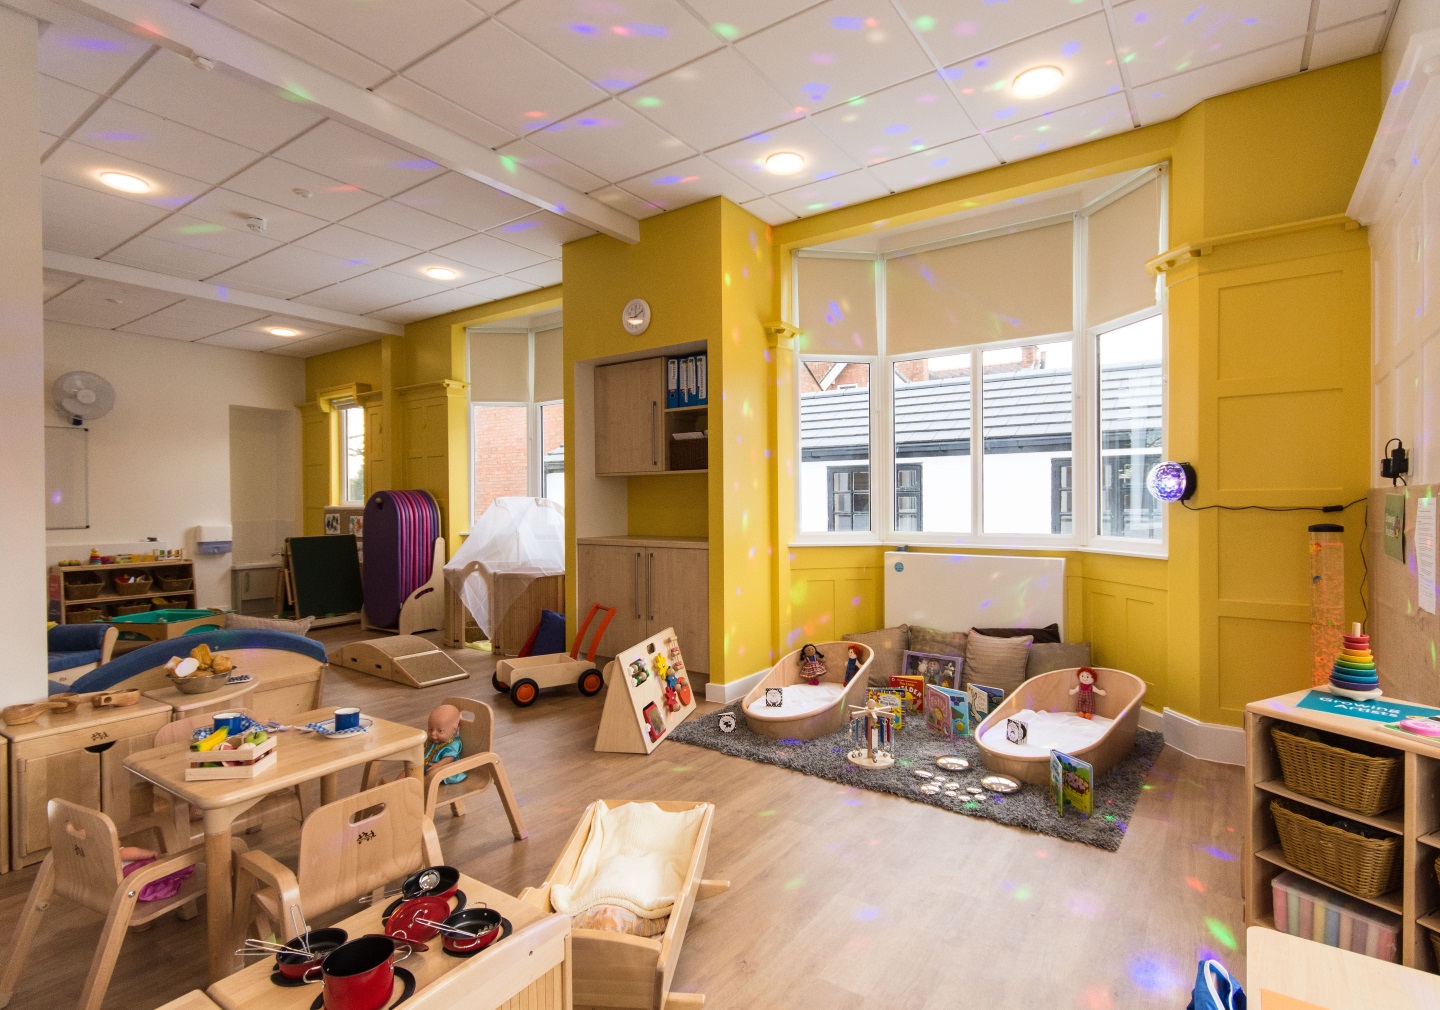 Images Bright Horizons Solihull Day Nursery and Preschool